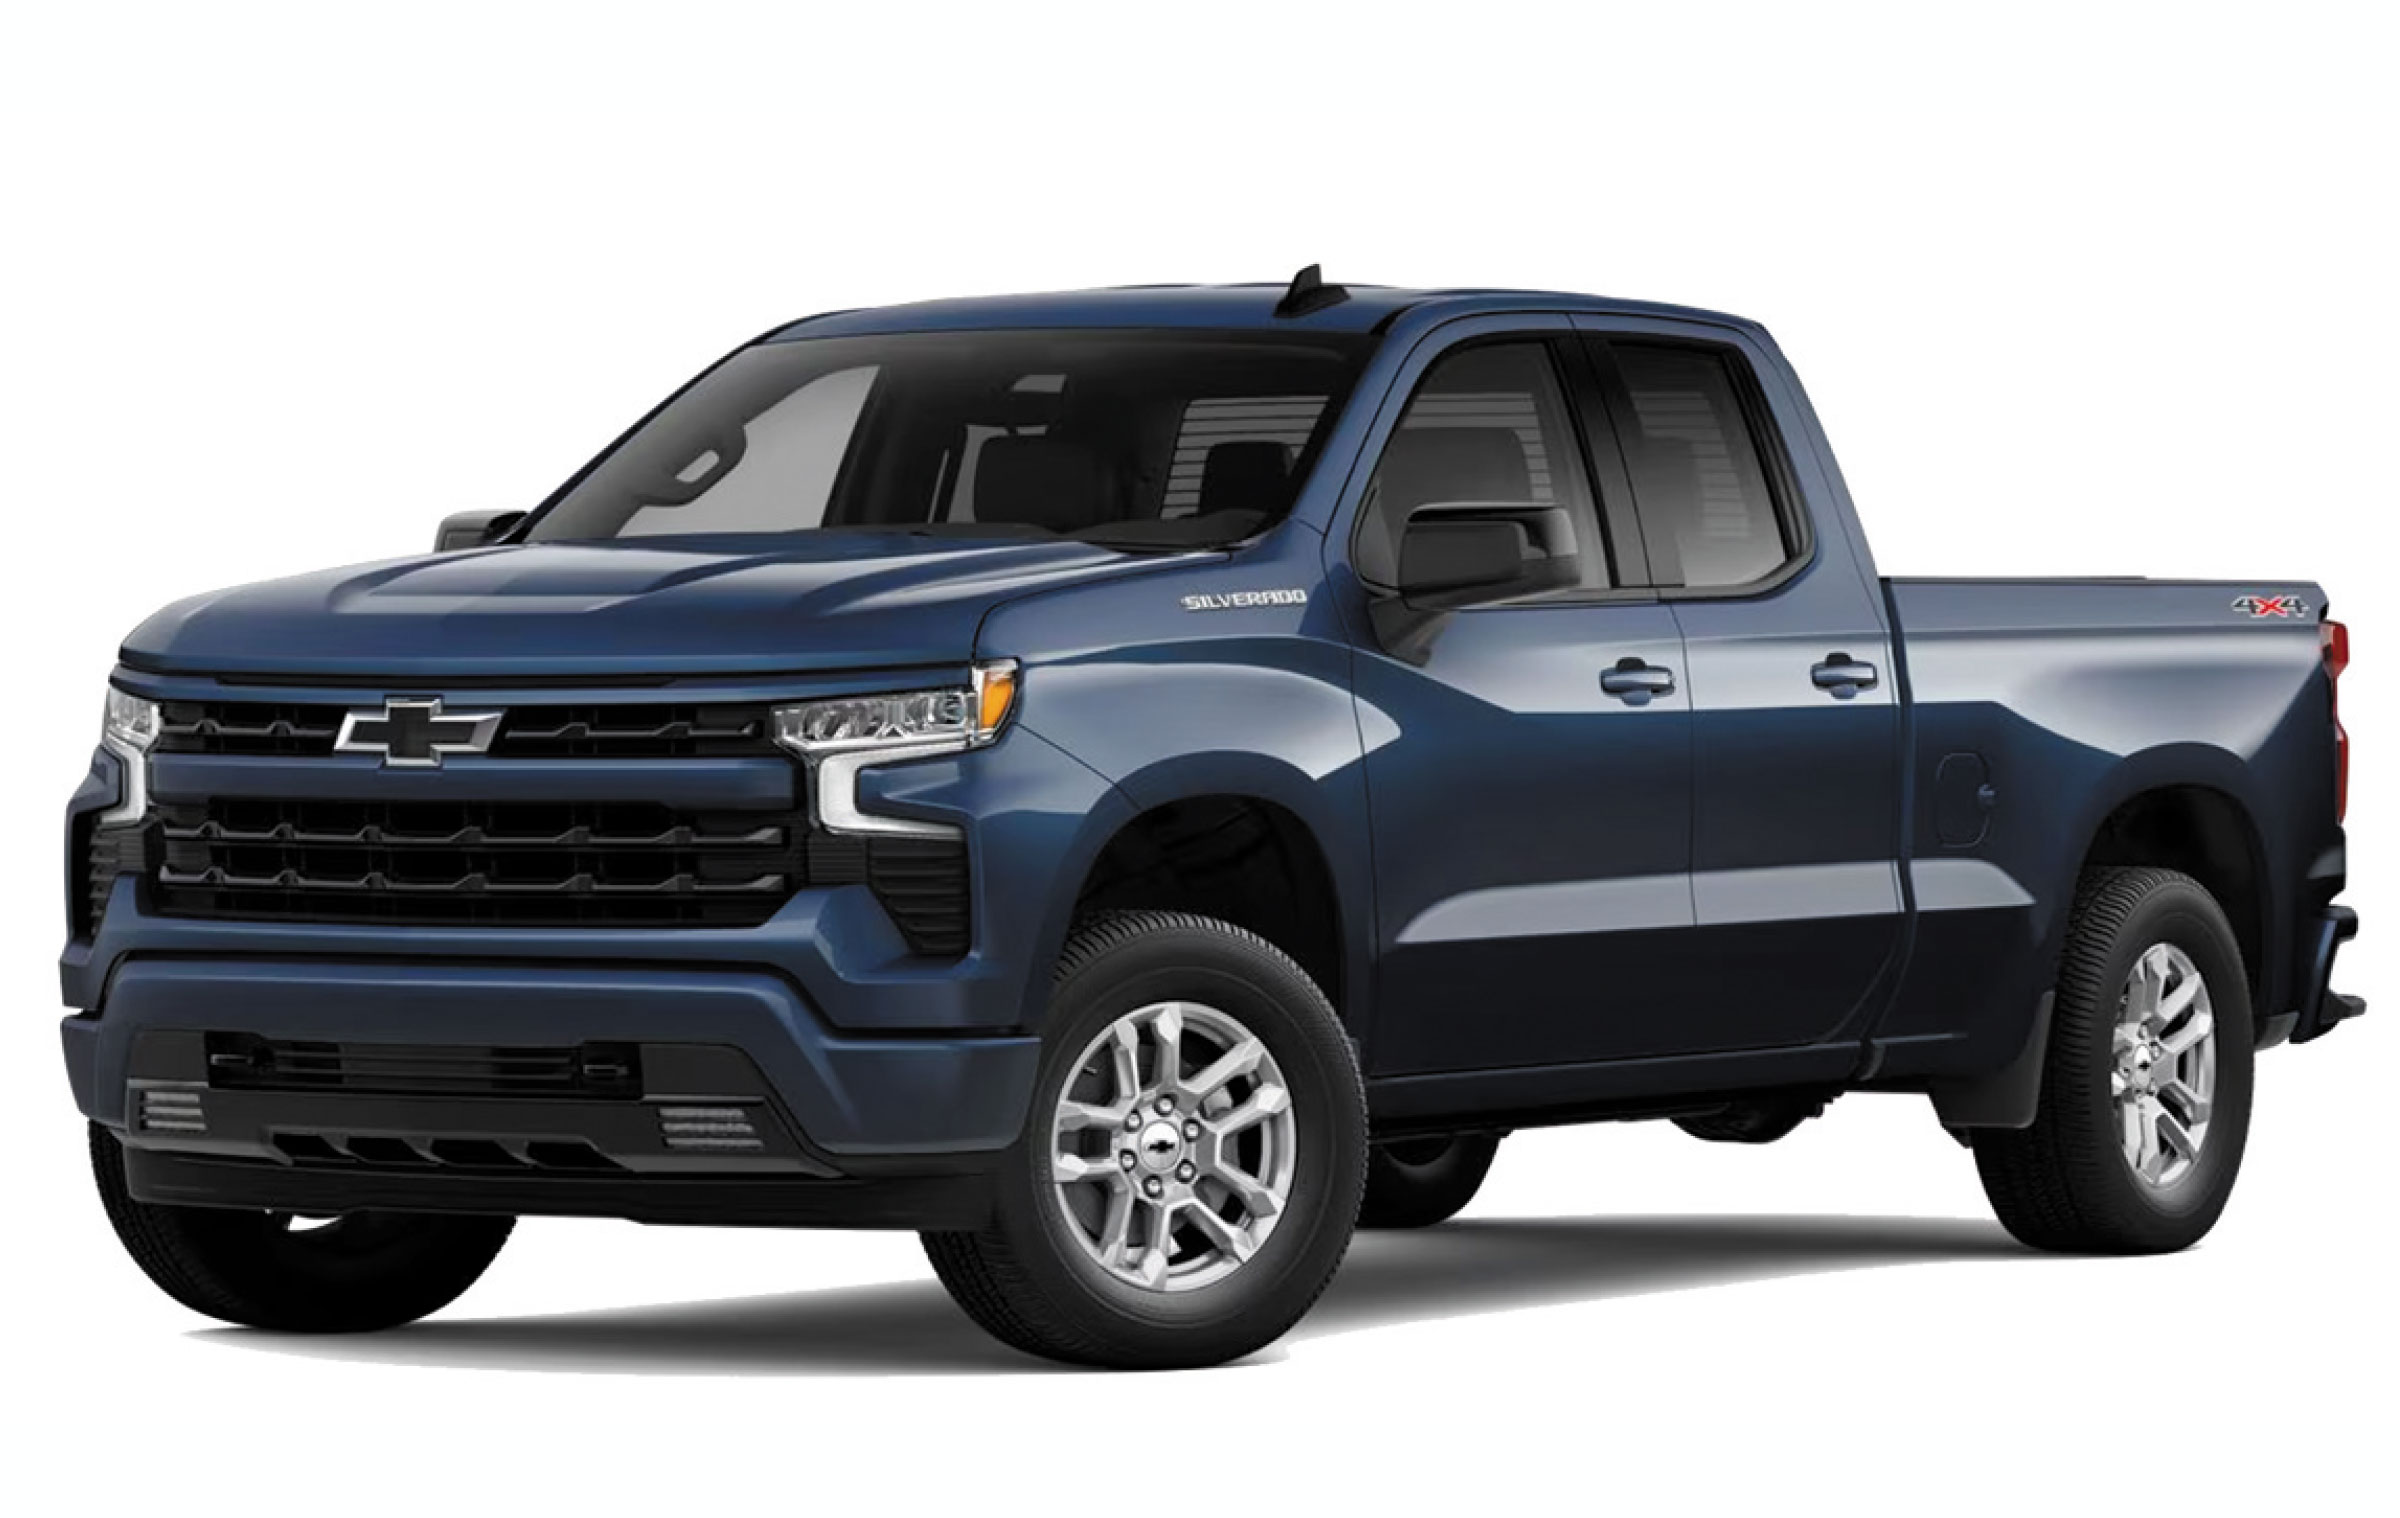 2023 Chevrolet Silverado 1500 Double Cab RST $339*/Month 24 Month Lease At Ed Rinke Chevrolet